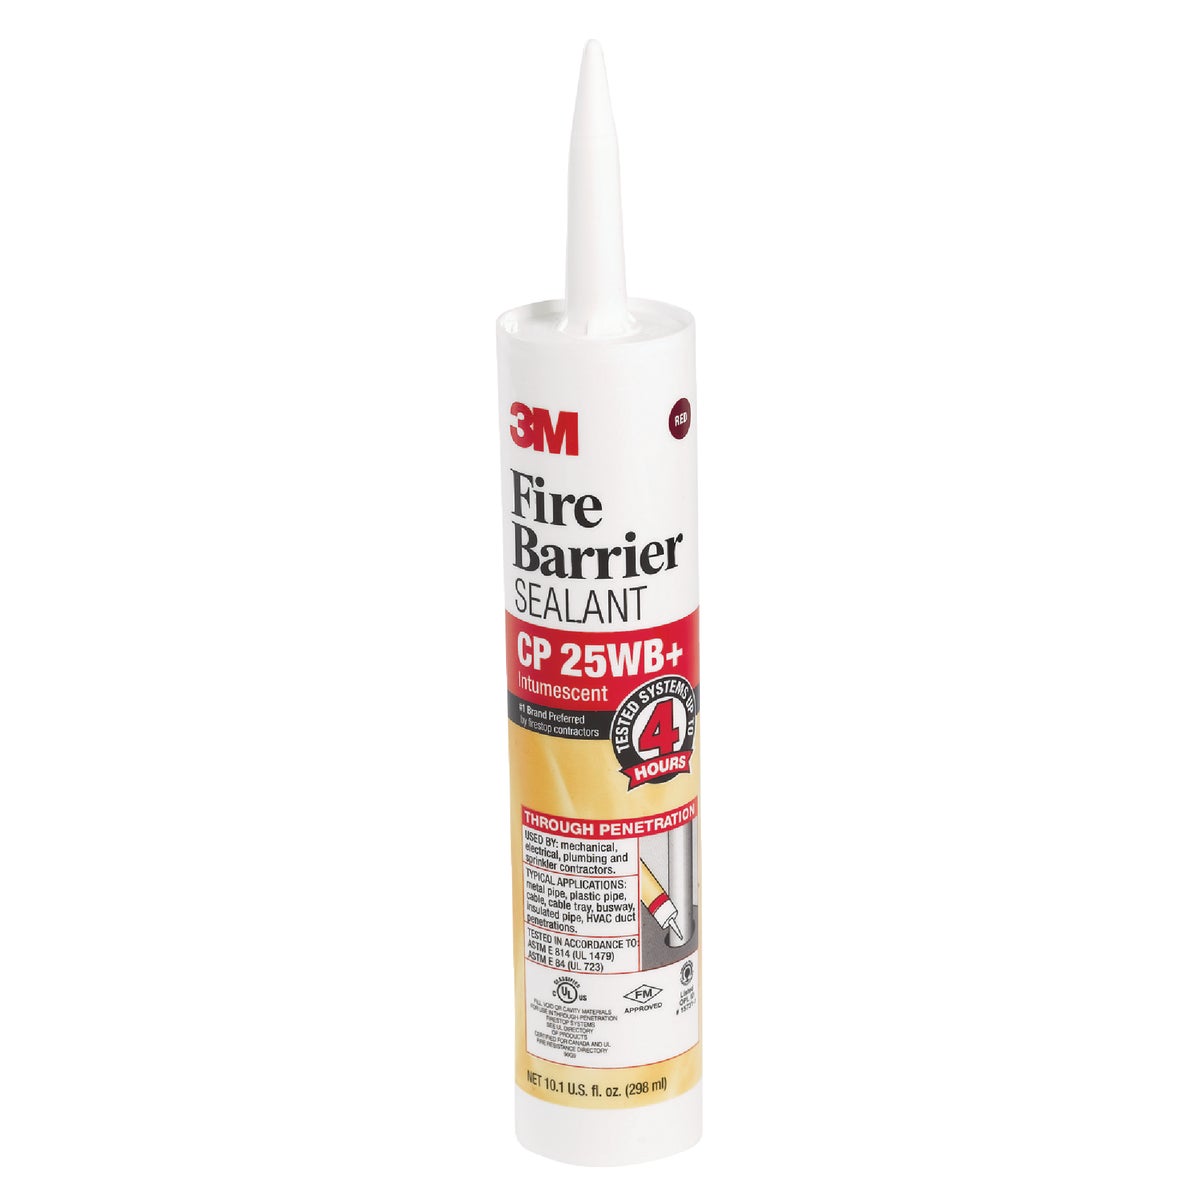 RED FIRE BARRIER SEALANT